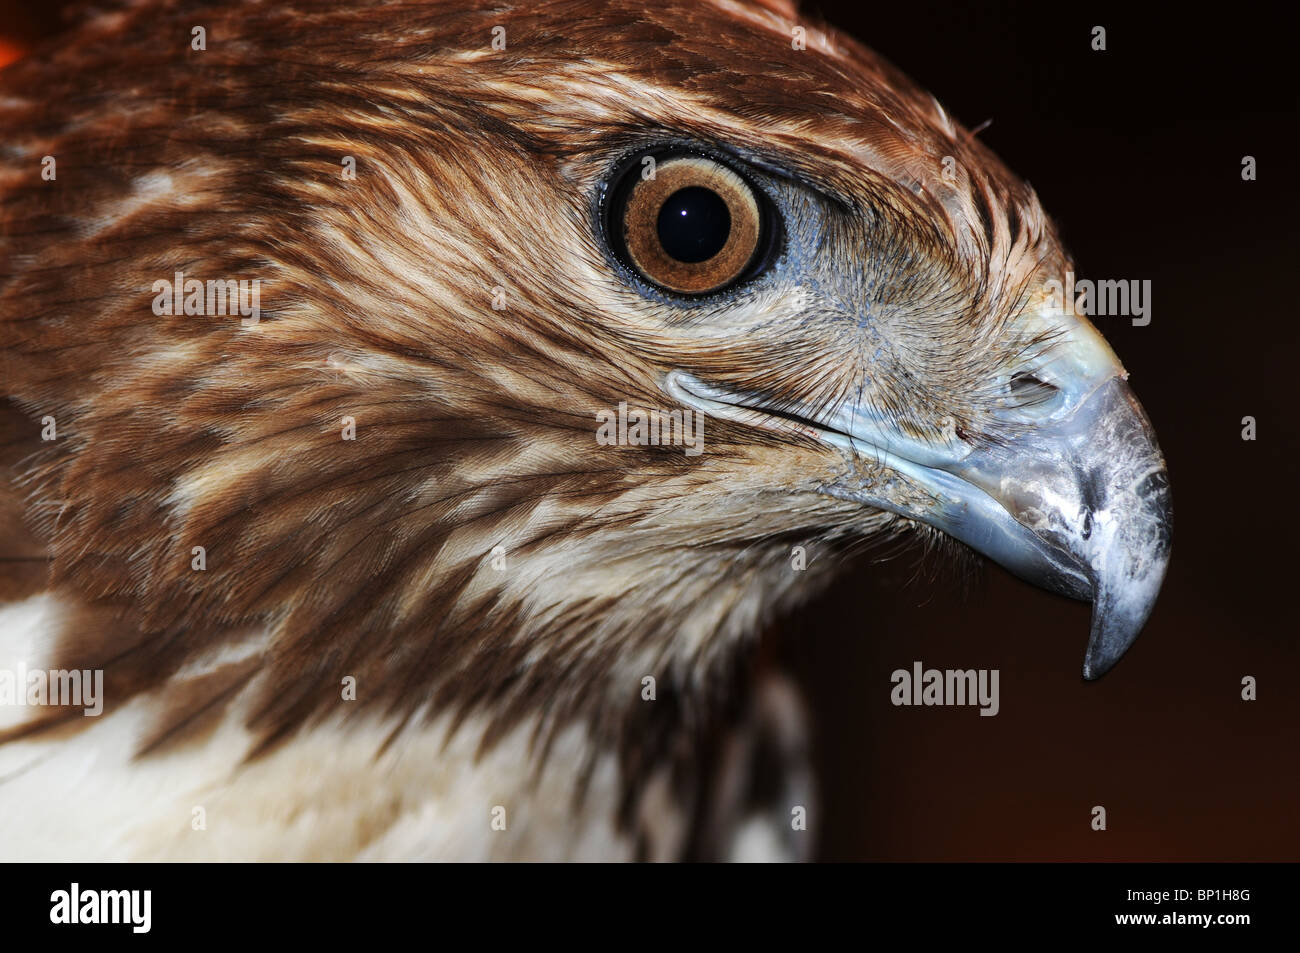 close-up of the head of a red-tailed hawk, Buteo jamaicensis Stock Photo